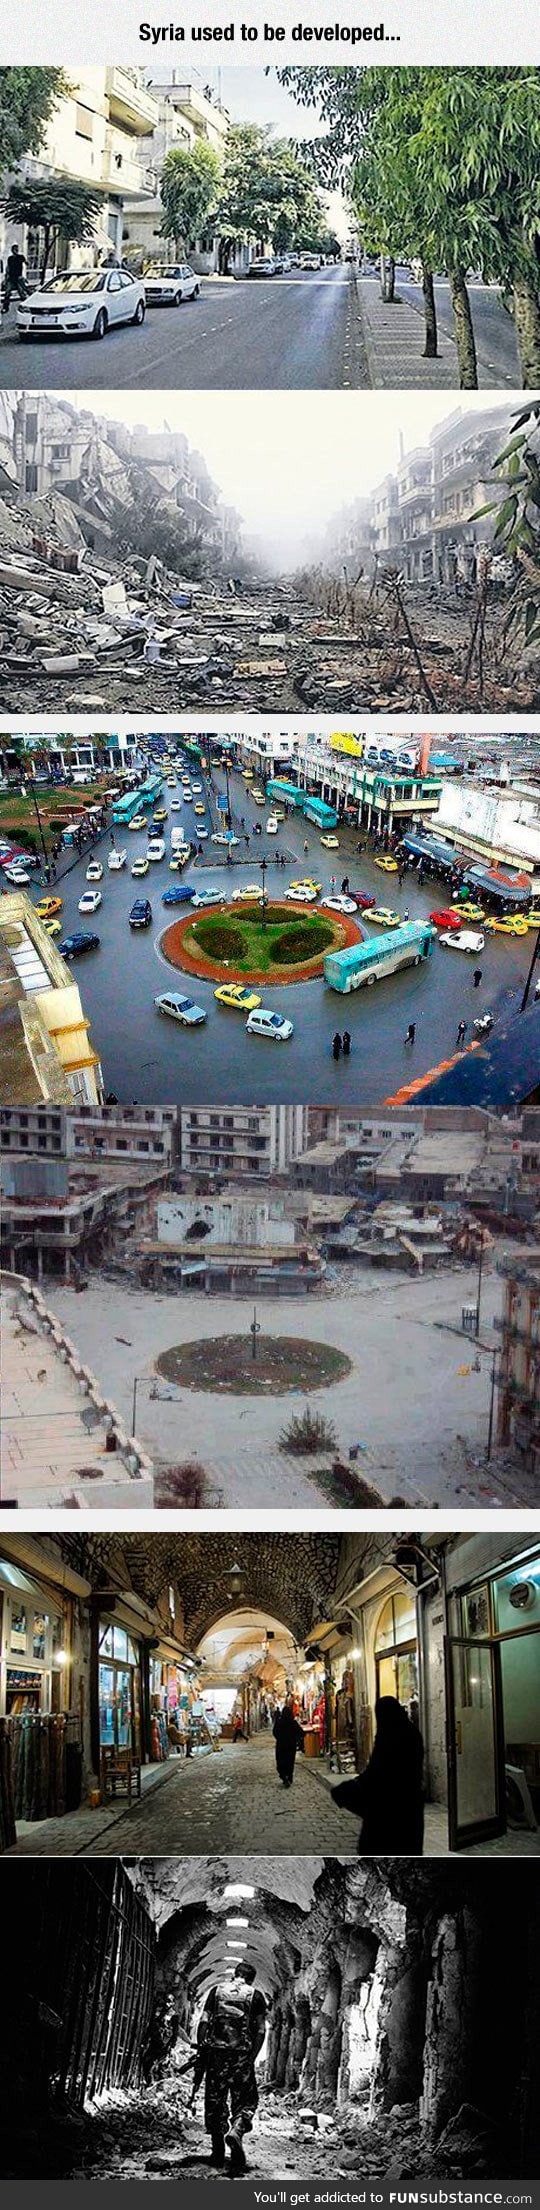 Photos of Syria when it used to be a developed city